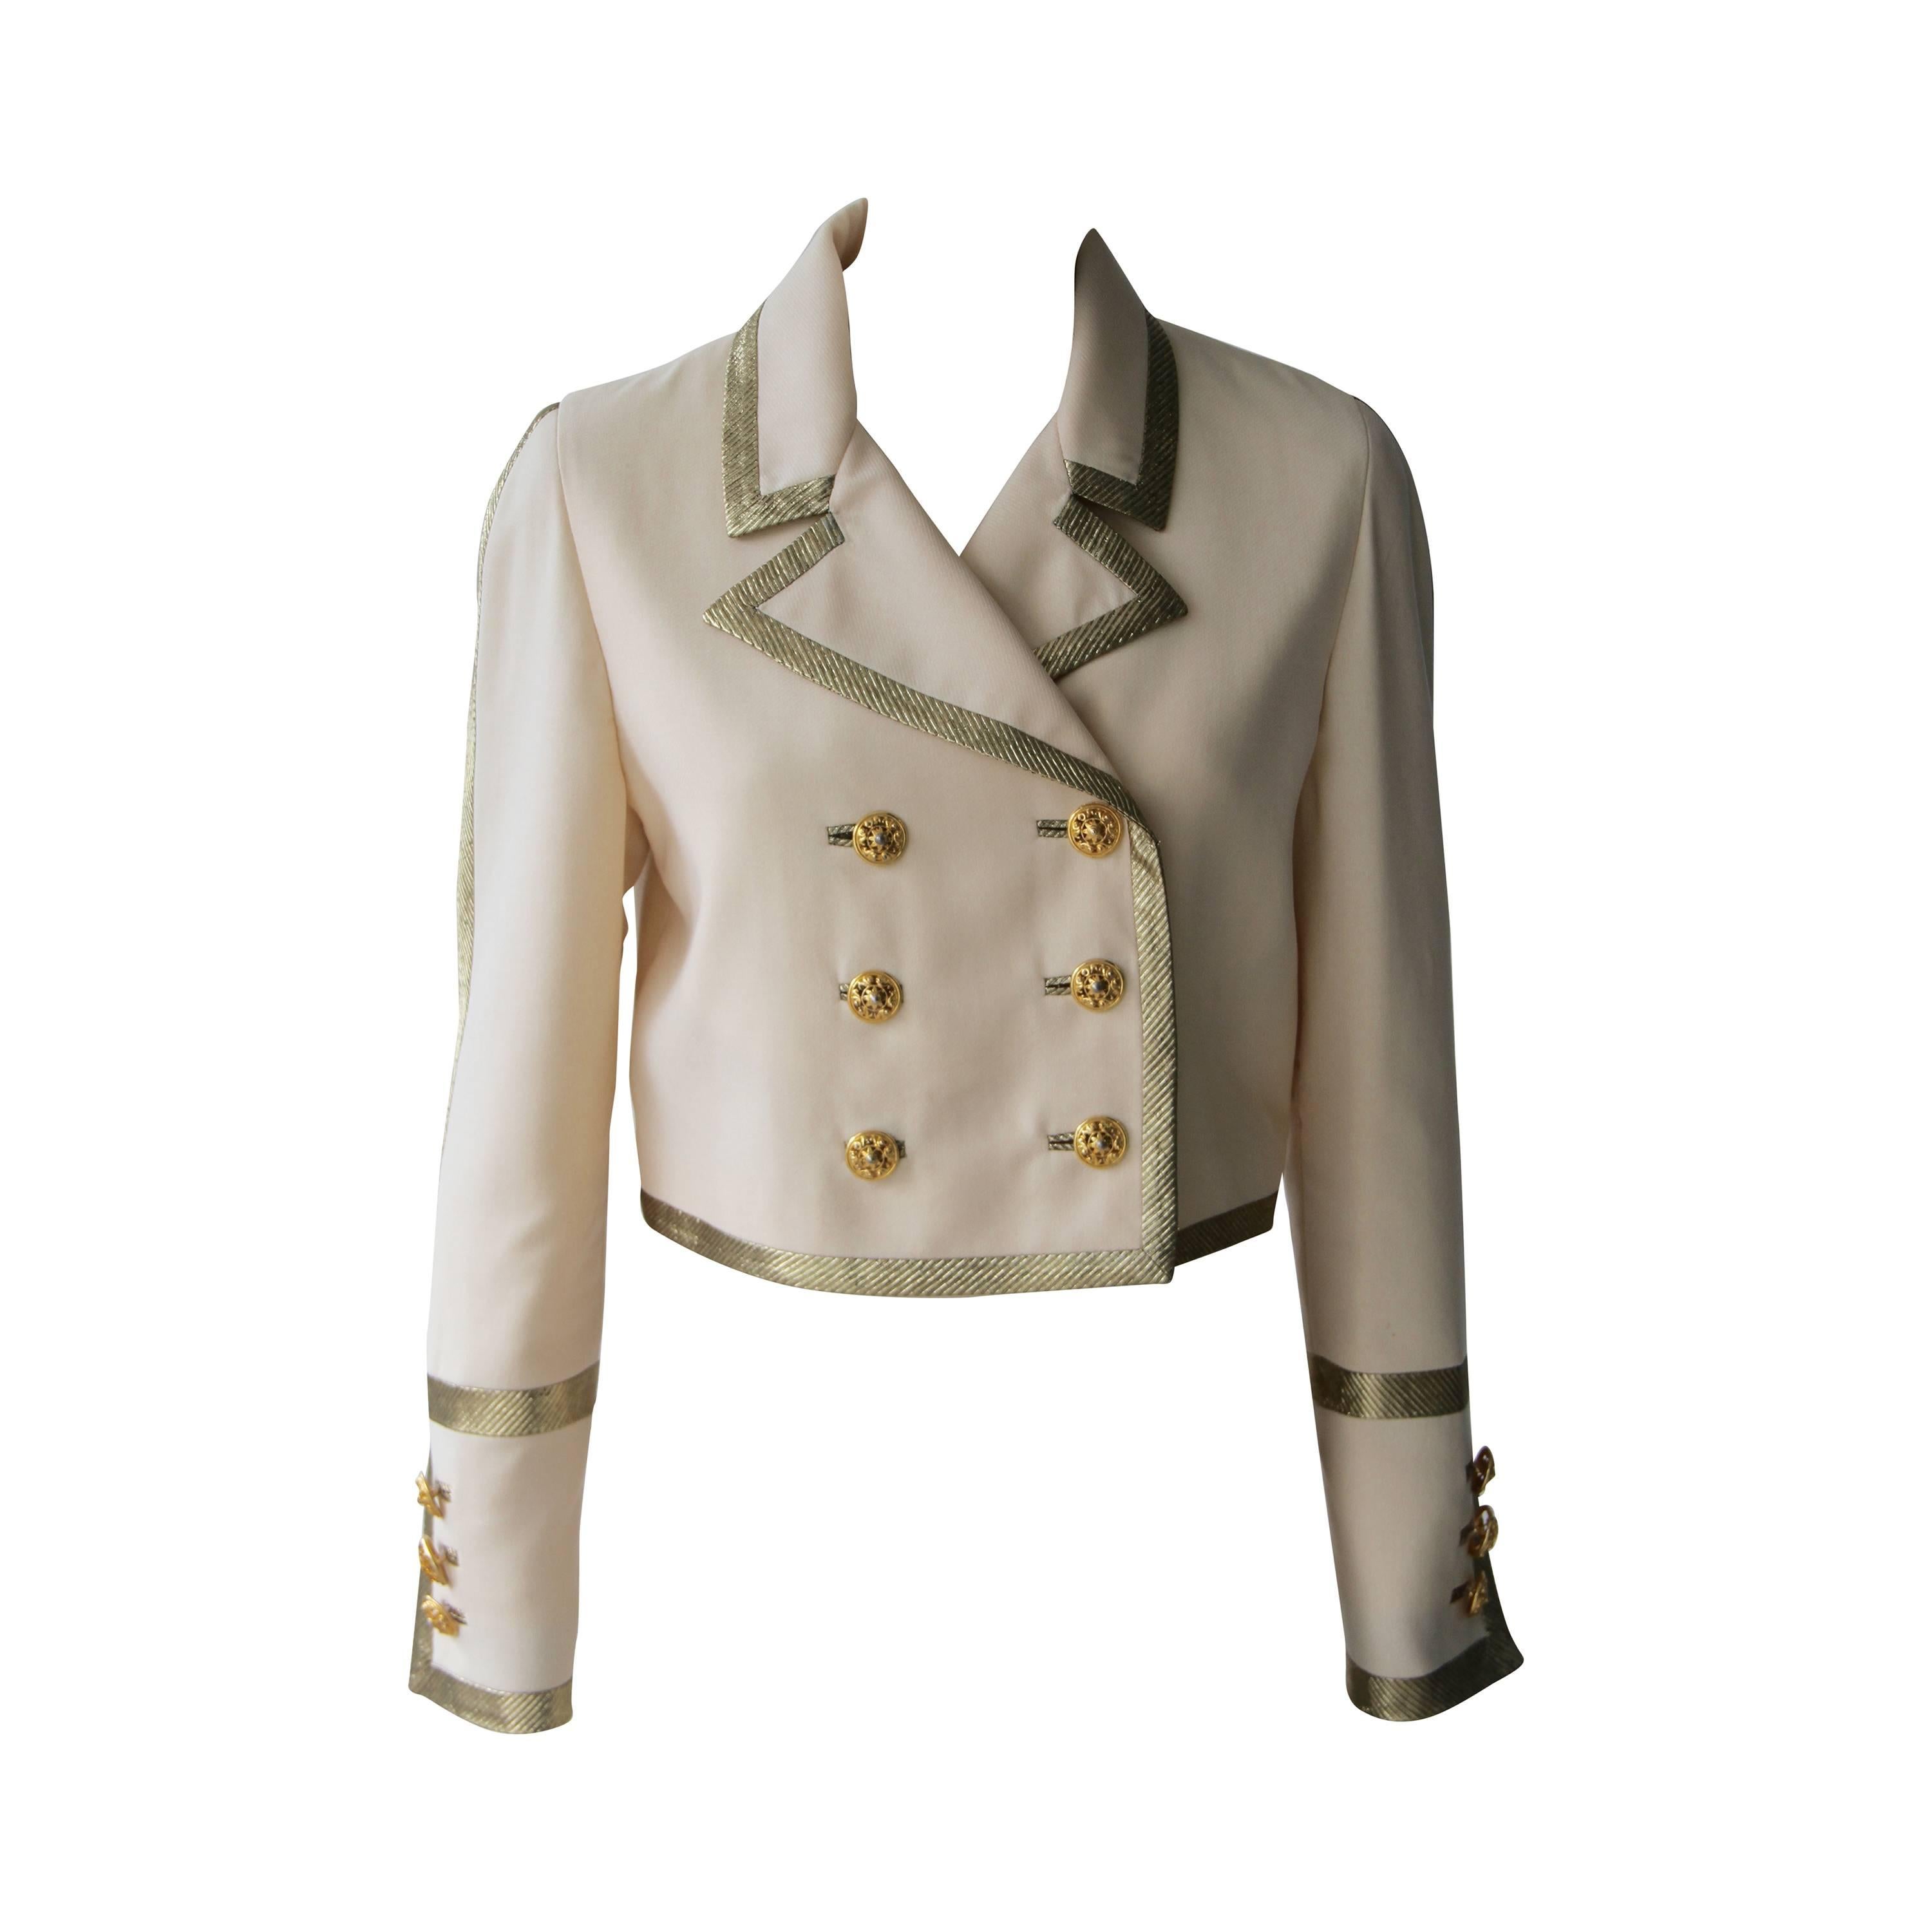 Gianni Versace Cropped Gold Metallic Braid Jacket Spring 1992 For Sale